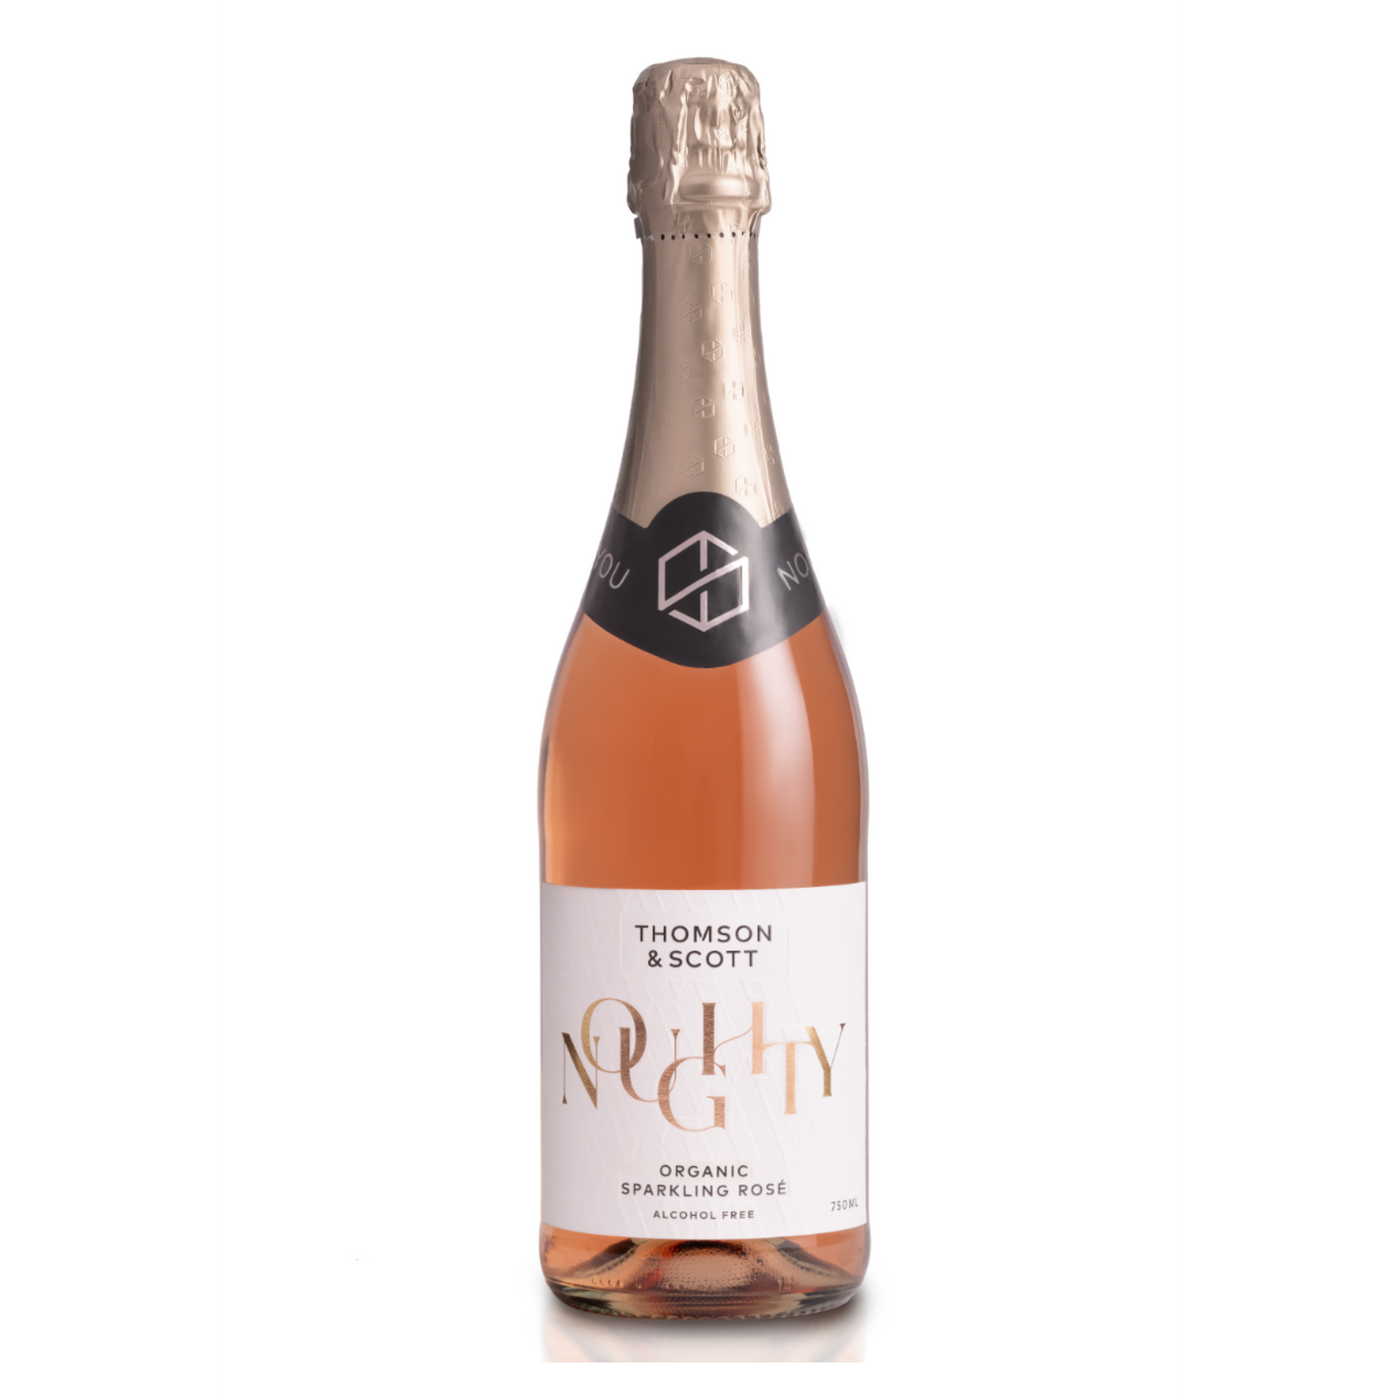 Thomson & Scott Noughty Organic Sparkling Non Alcohol Rose 75cl